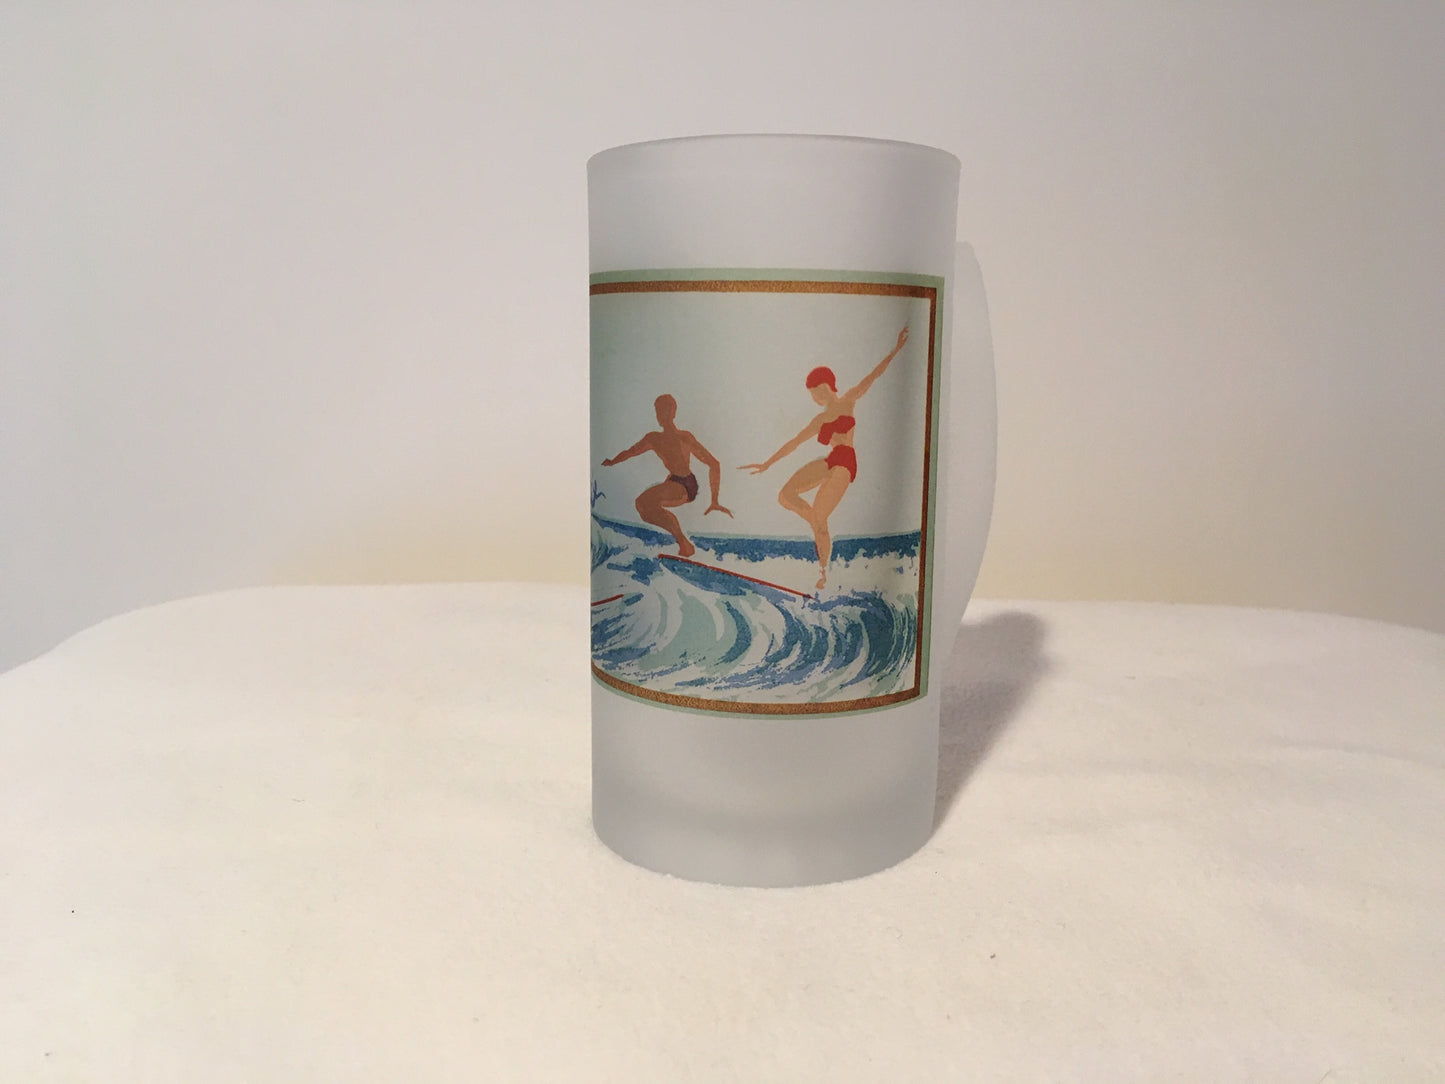 Colorful Frosted Glass Mug of Lady Surfer in Malibu, CA from Serigraph - That Fabled Shore Home Decor